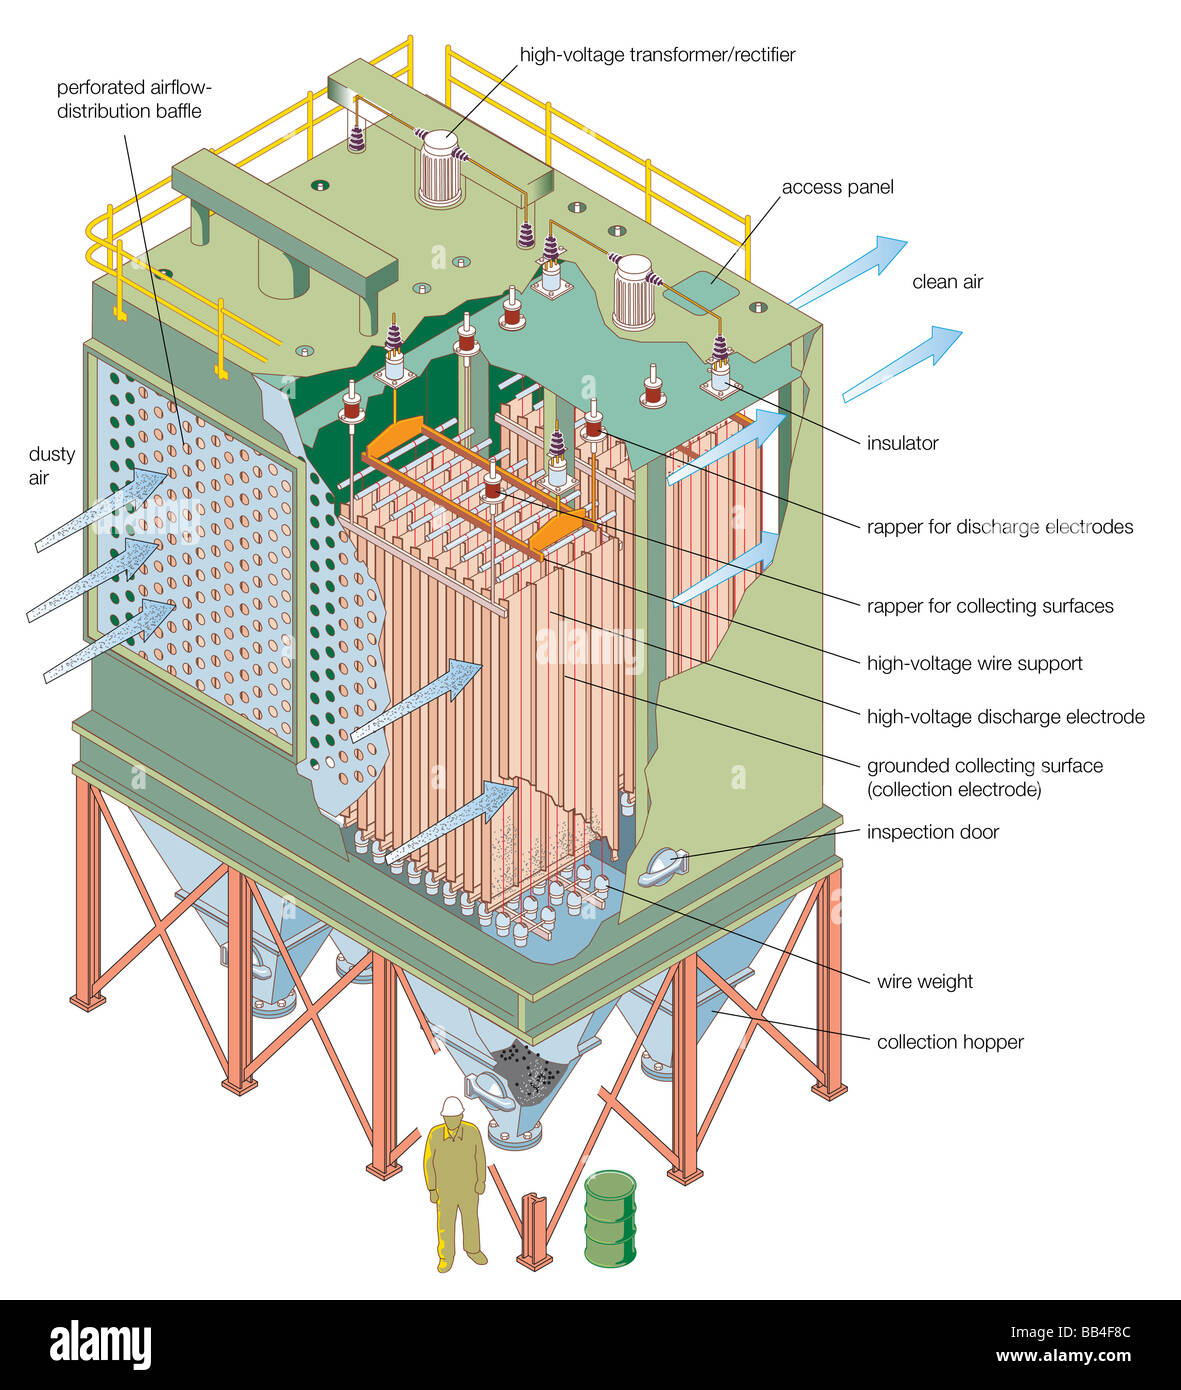 Electrostatic precipitator, a common particle collection device at fossil-fuel power-generating stations. Stock Photo